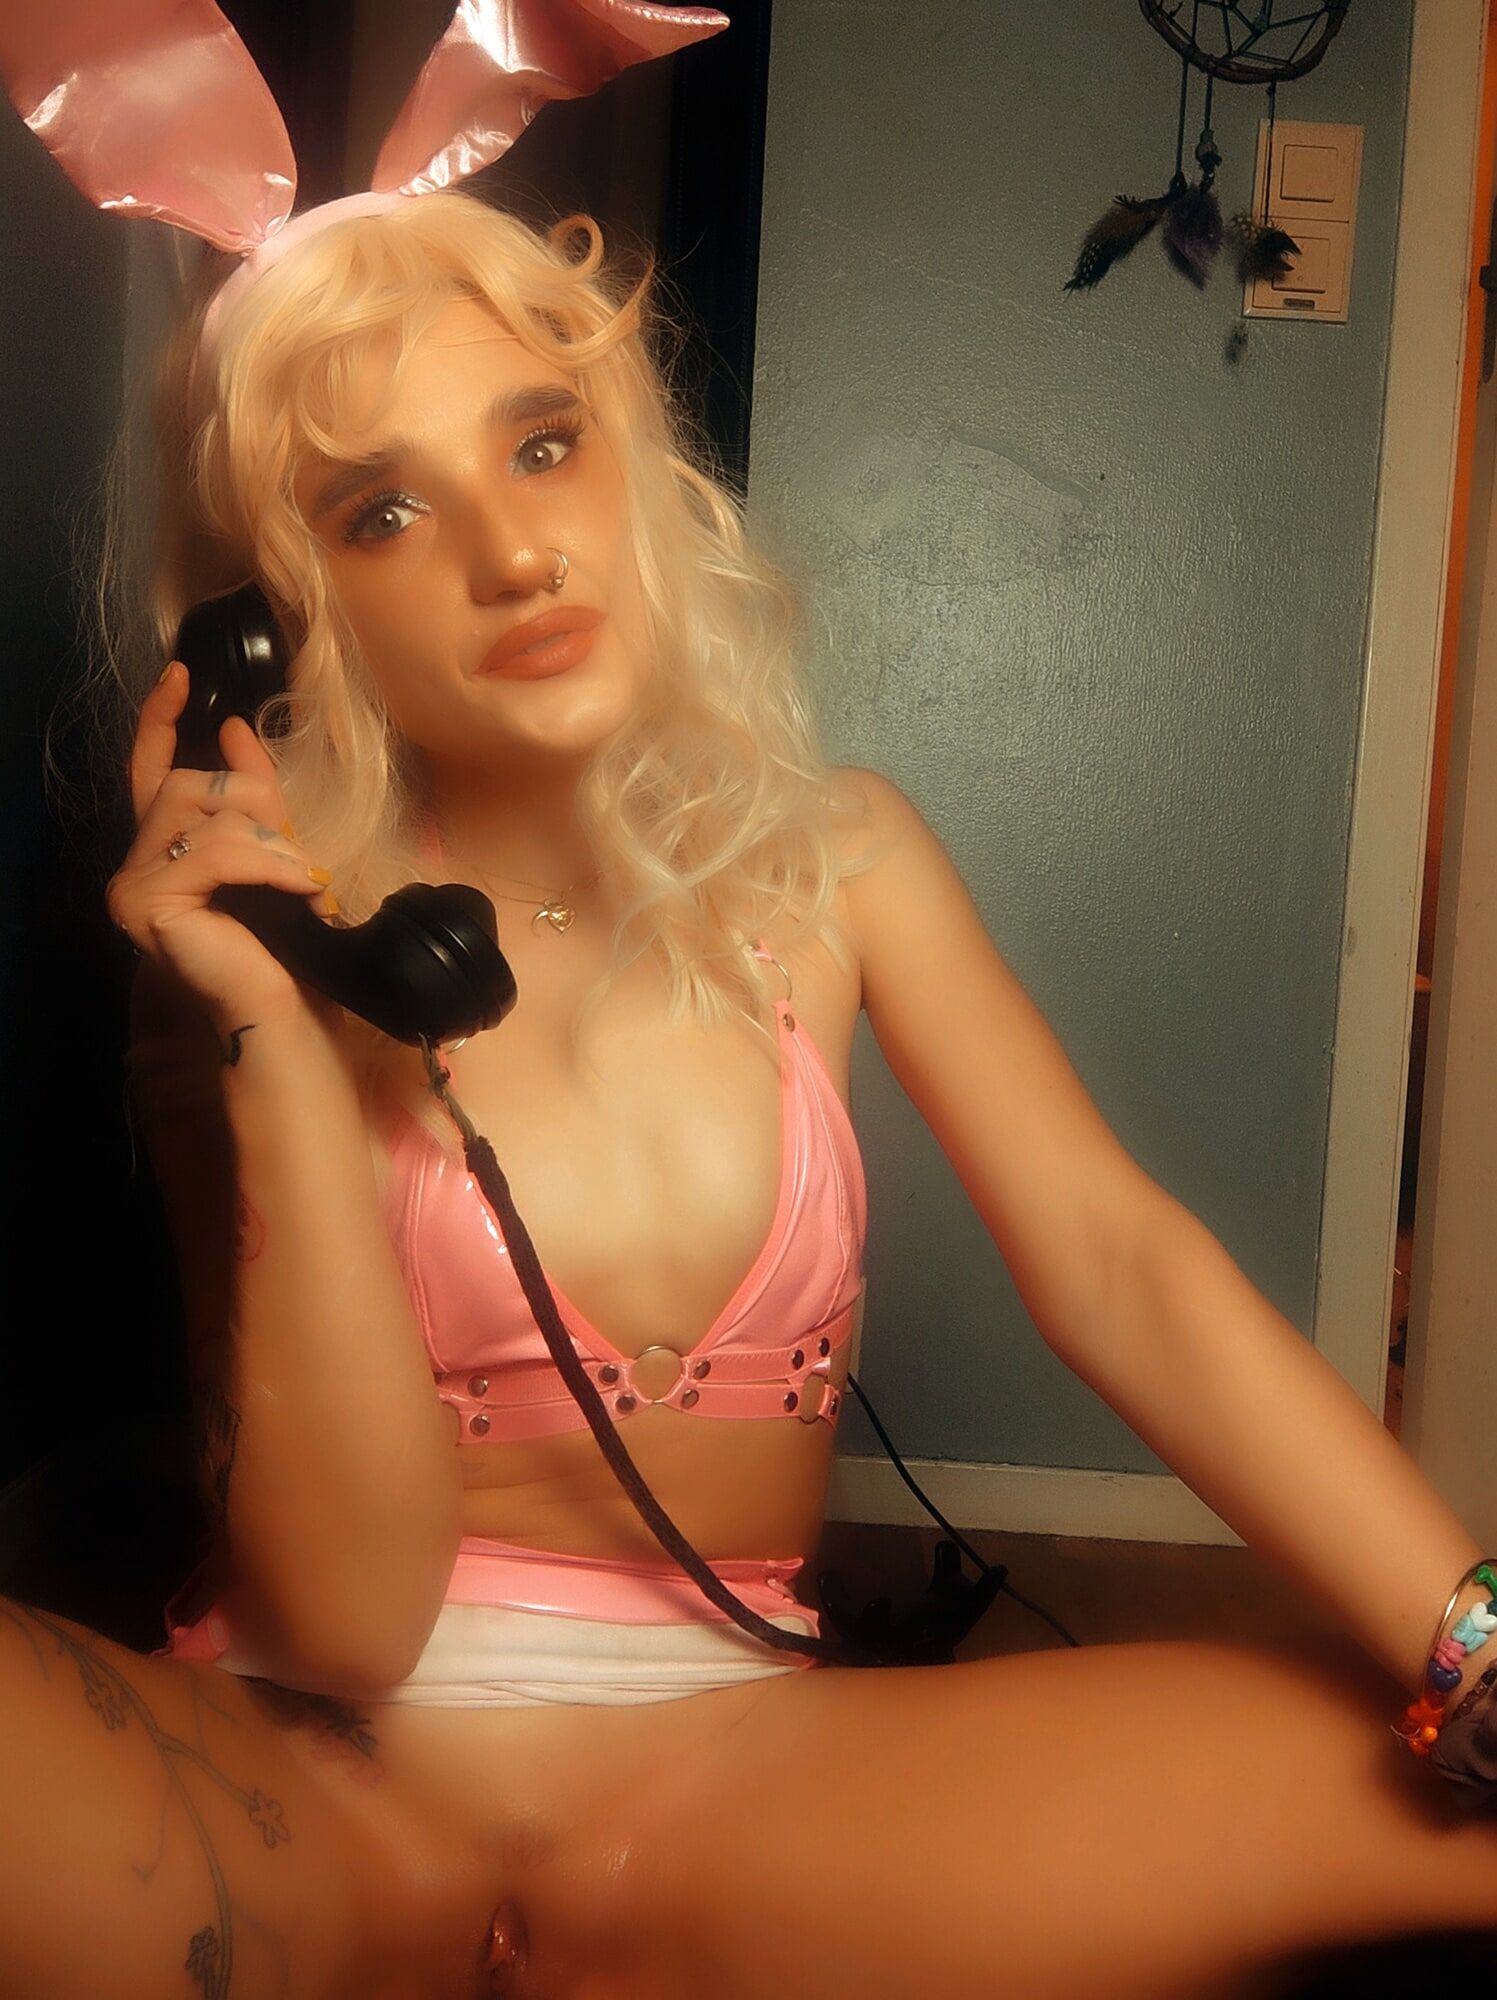 Pink bunny talking on the phone while showing off pussy #30